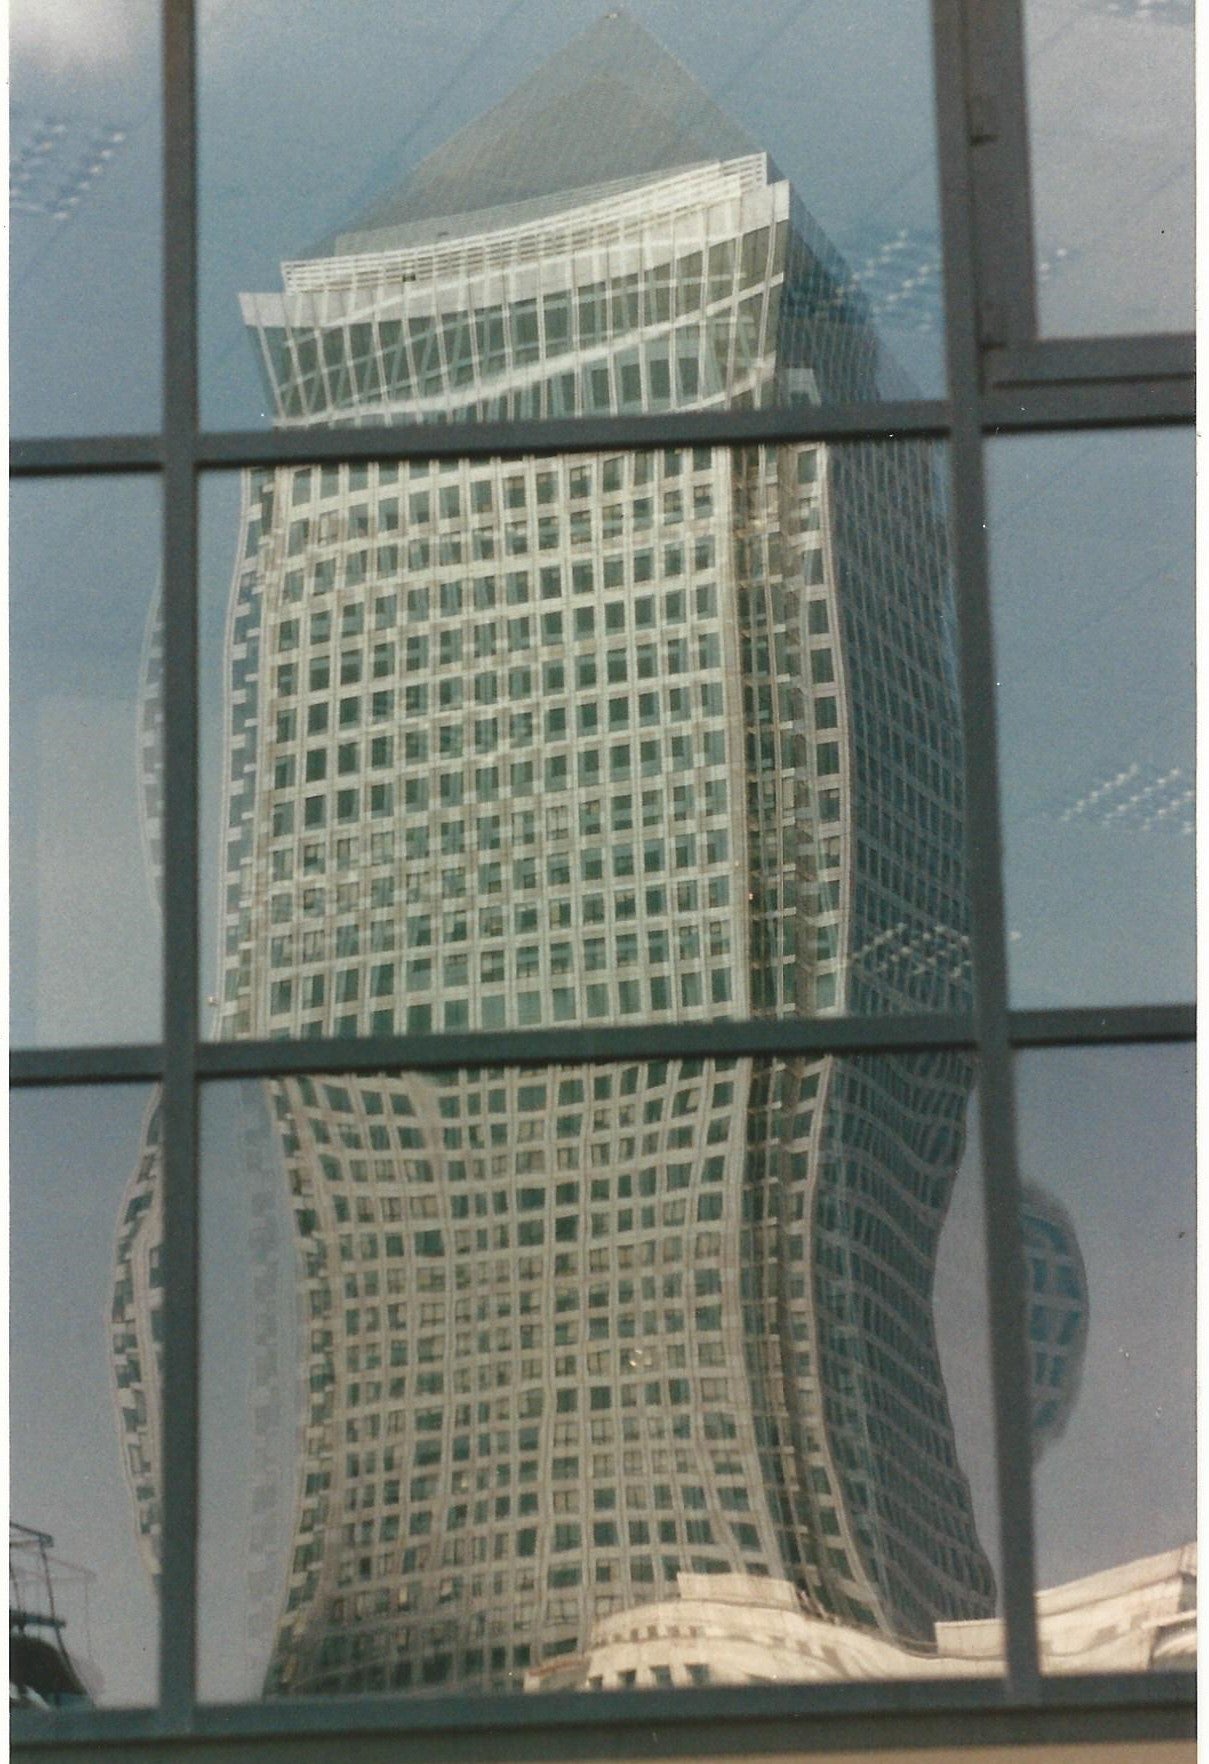 Canary Wharf Reflection photograph by Reginald Beer